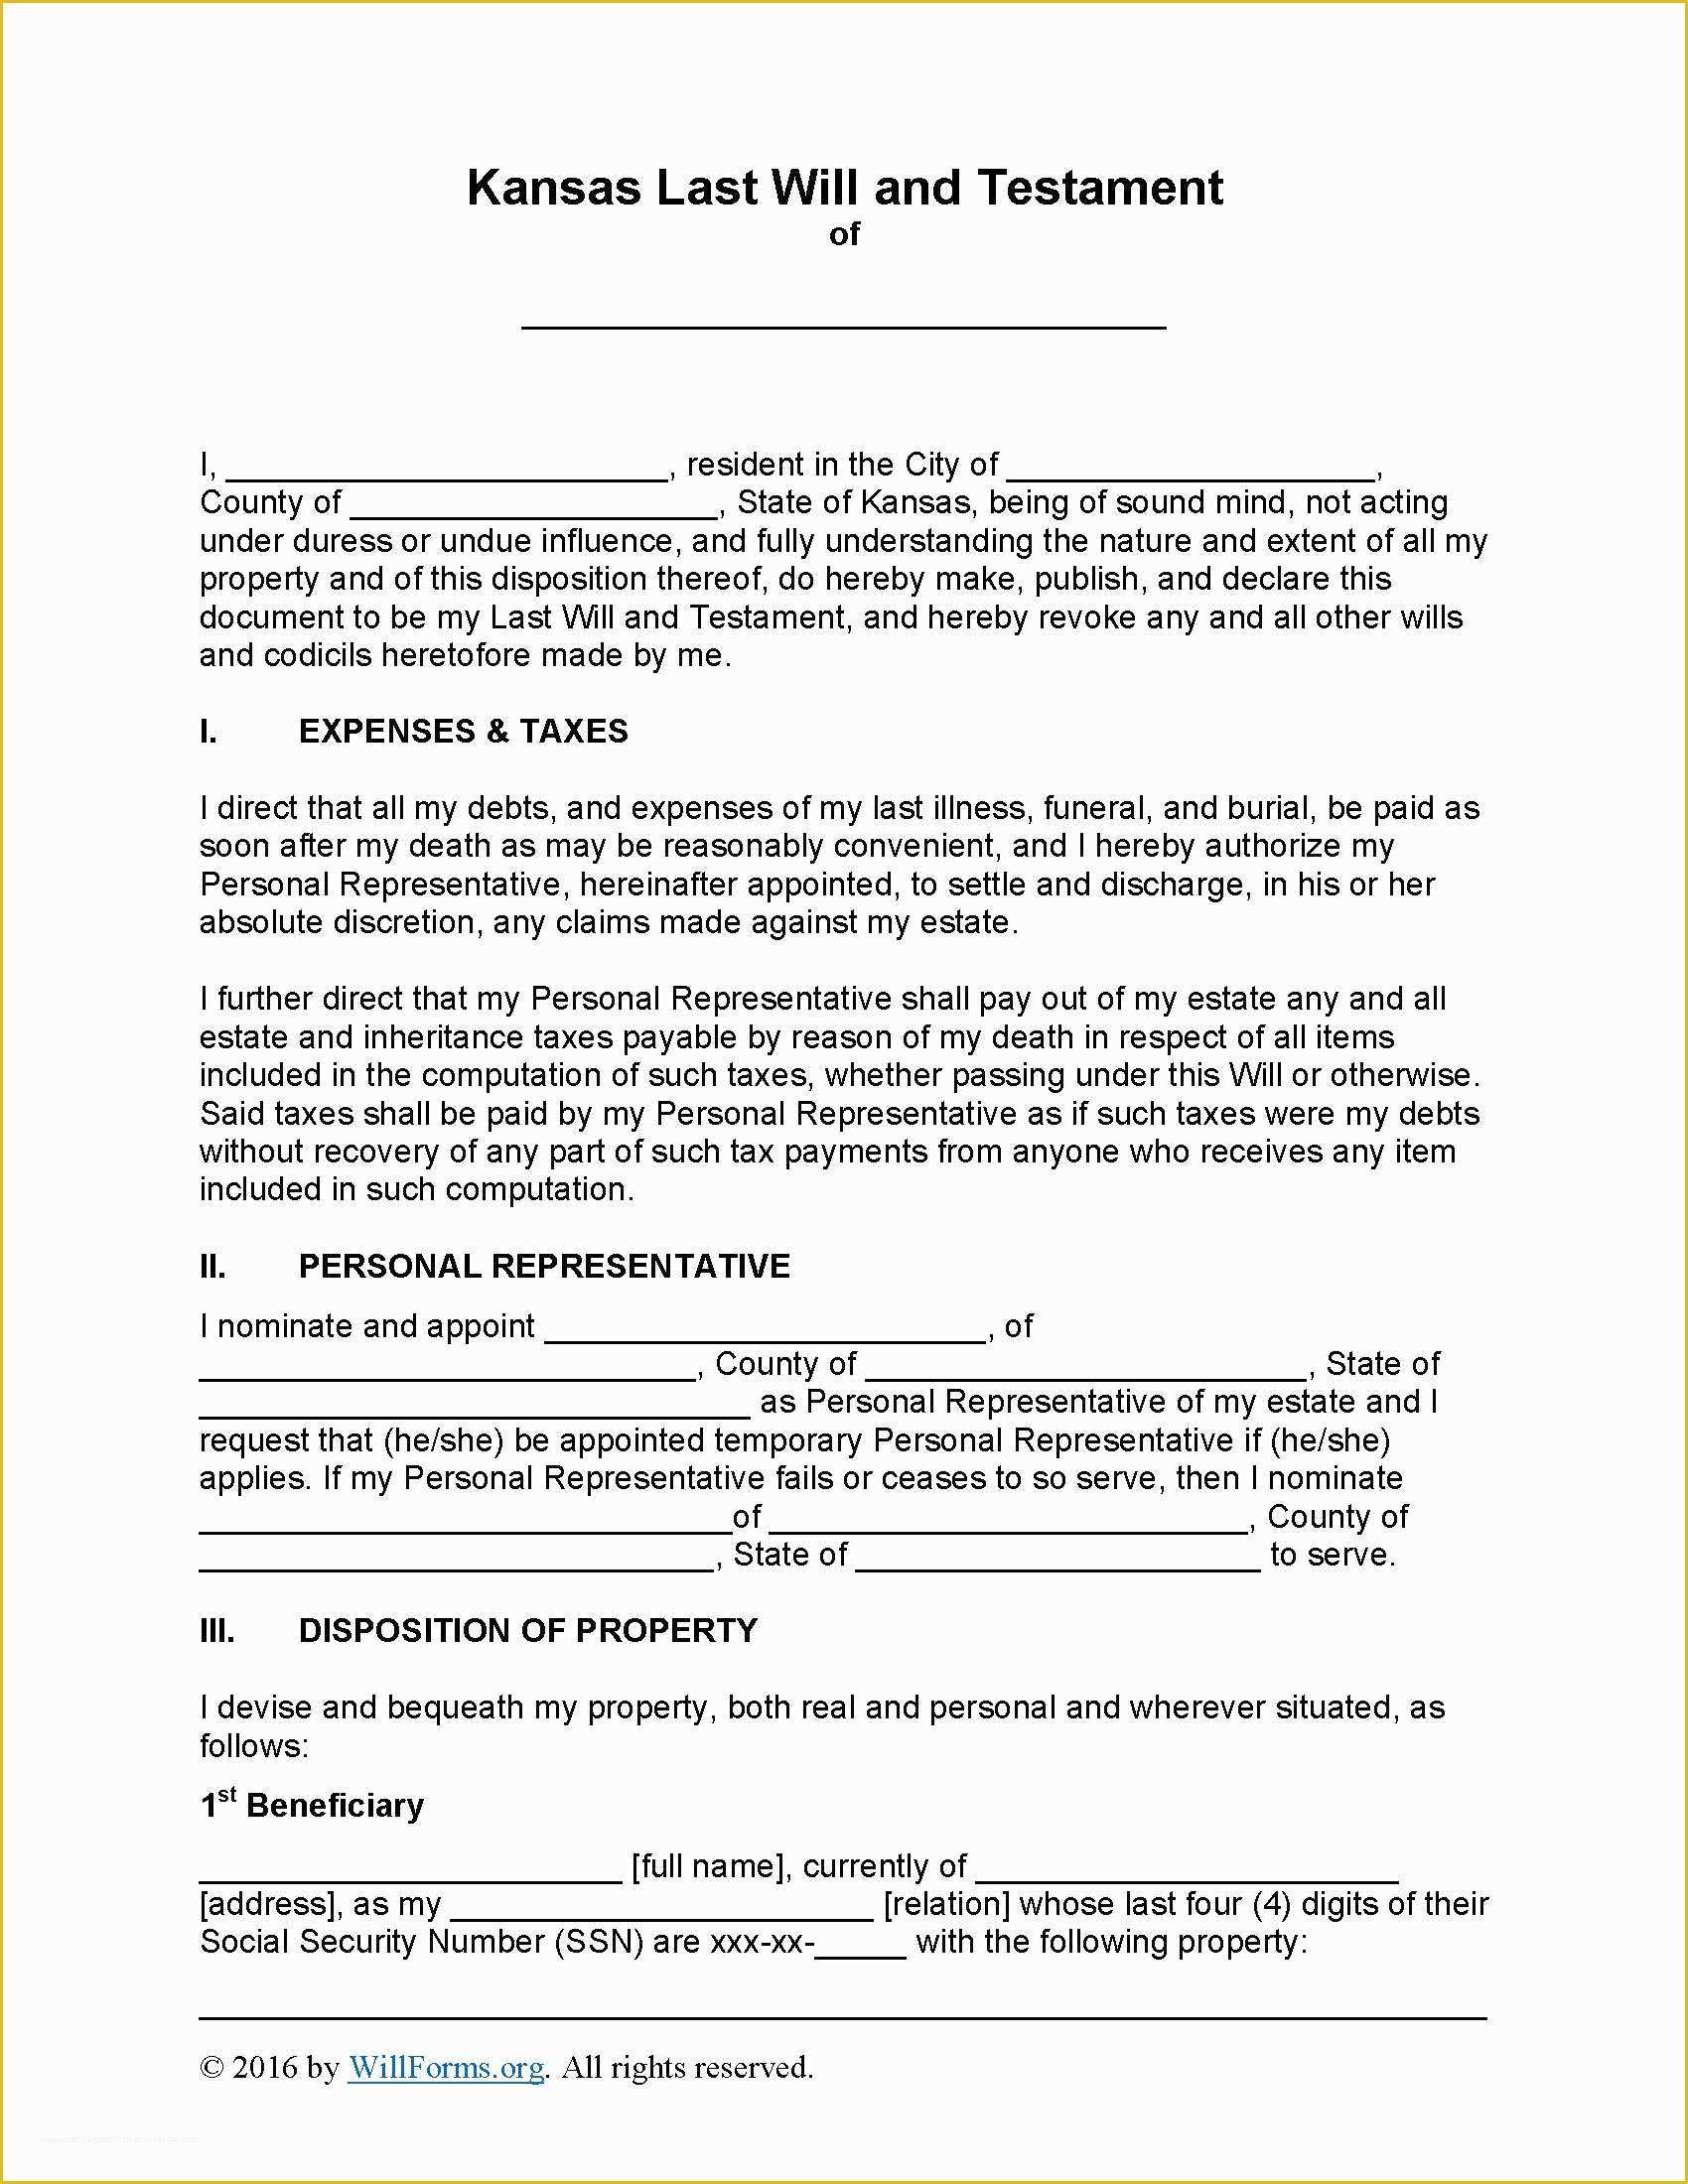 Virginia Last Will and Testament Free Template Of Kansas Last Will and Testament form Will forms Will forms